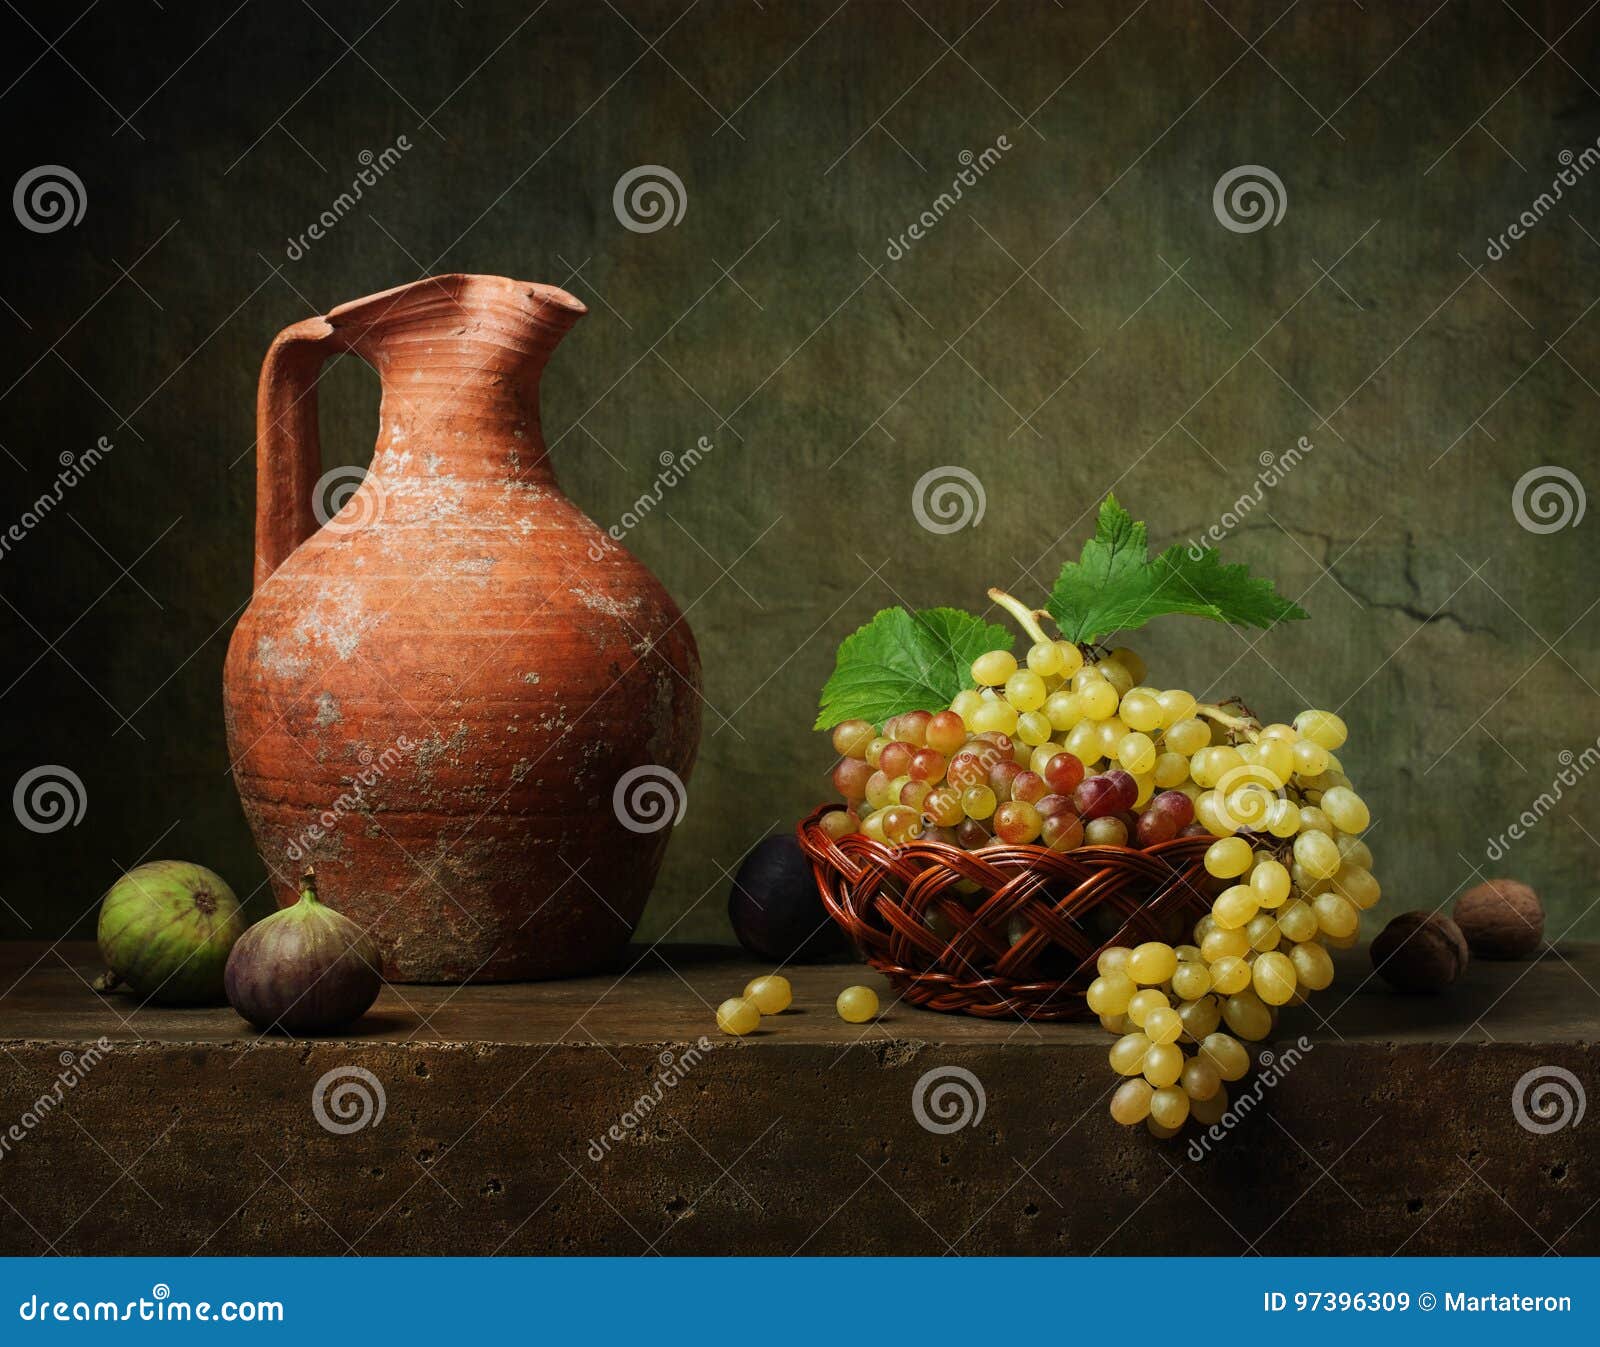 still life with grapes and figs